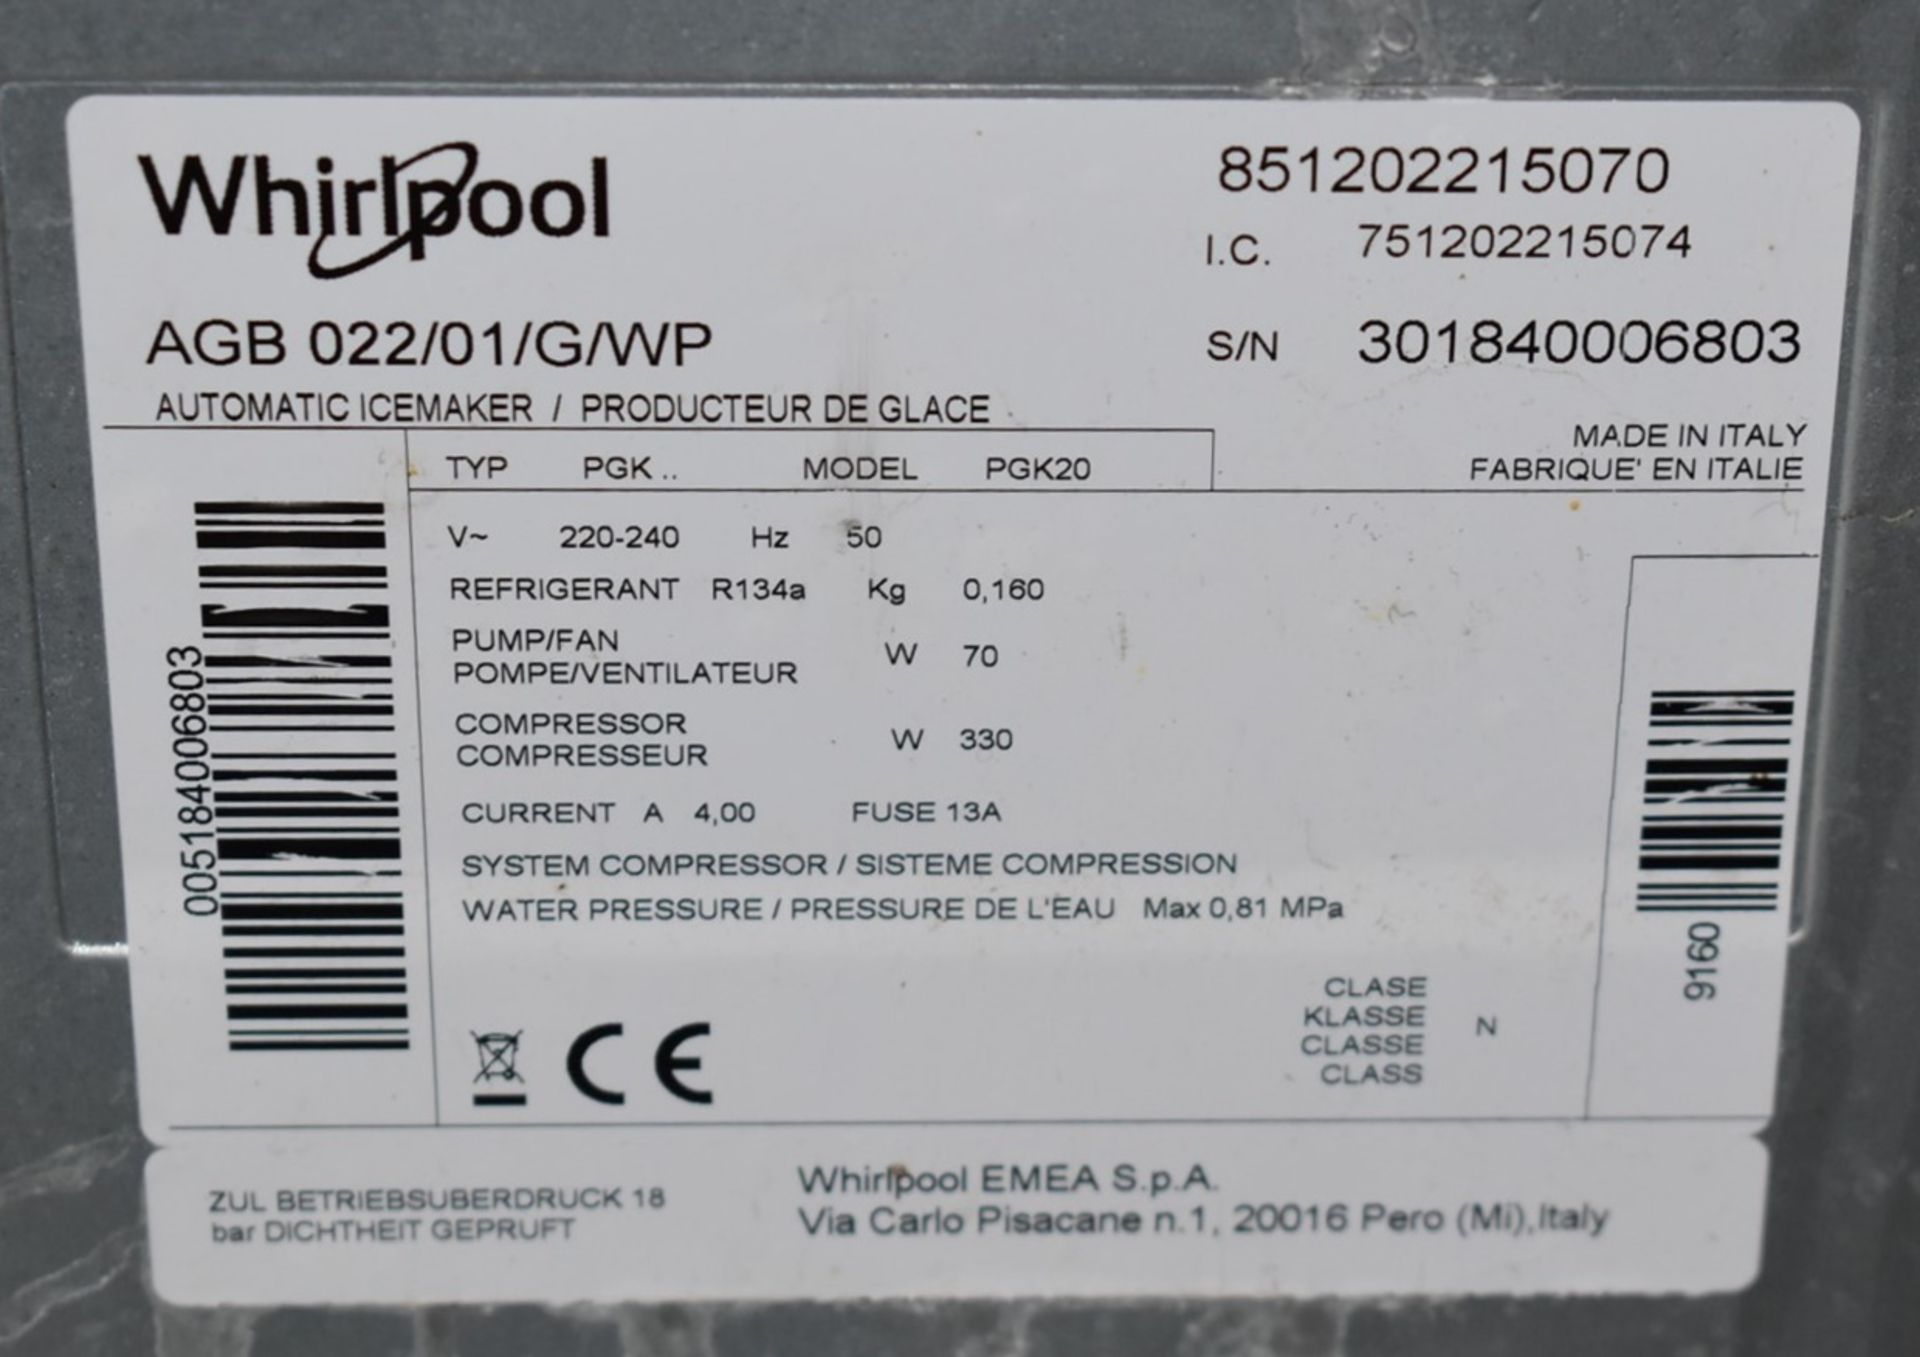 1 x Whirlpool AGP 022 Automatic Countertop Ice Maker - 240v - Image 8 of 9